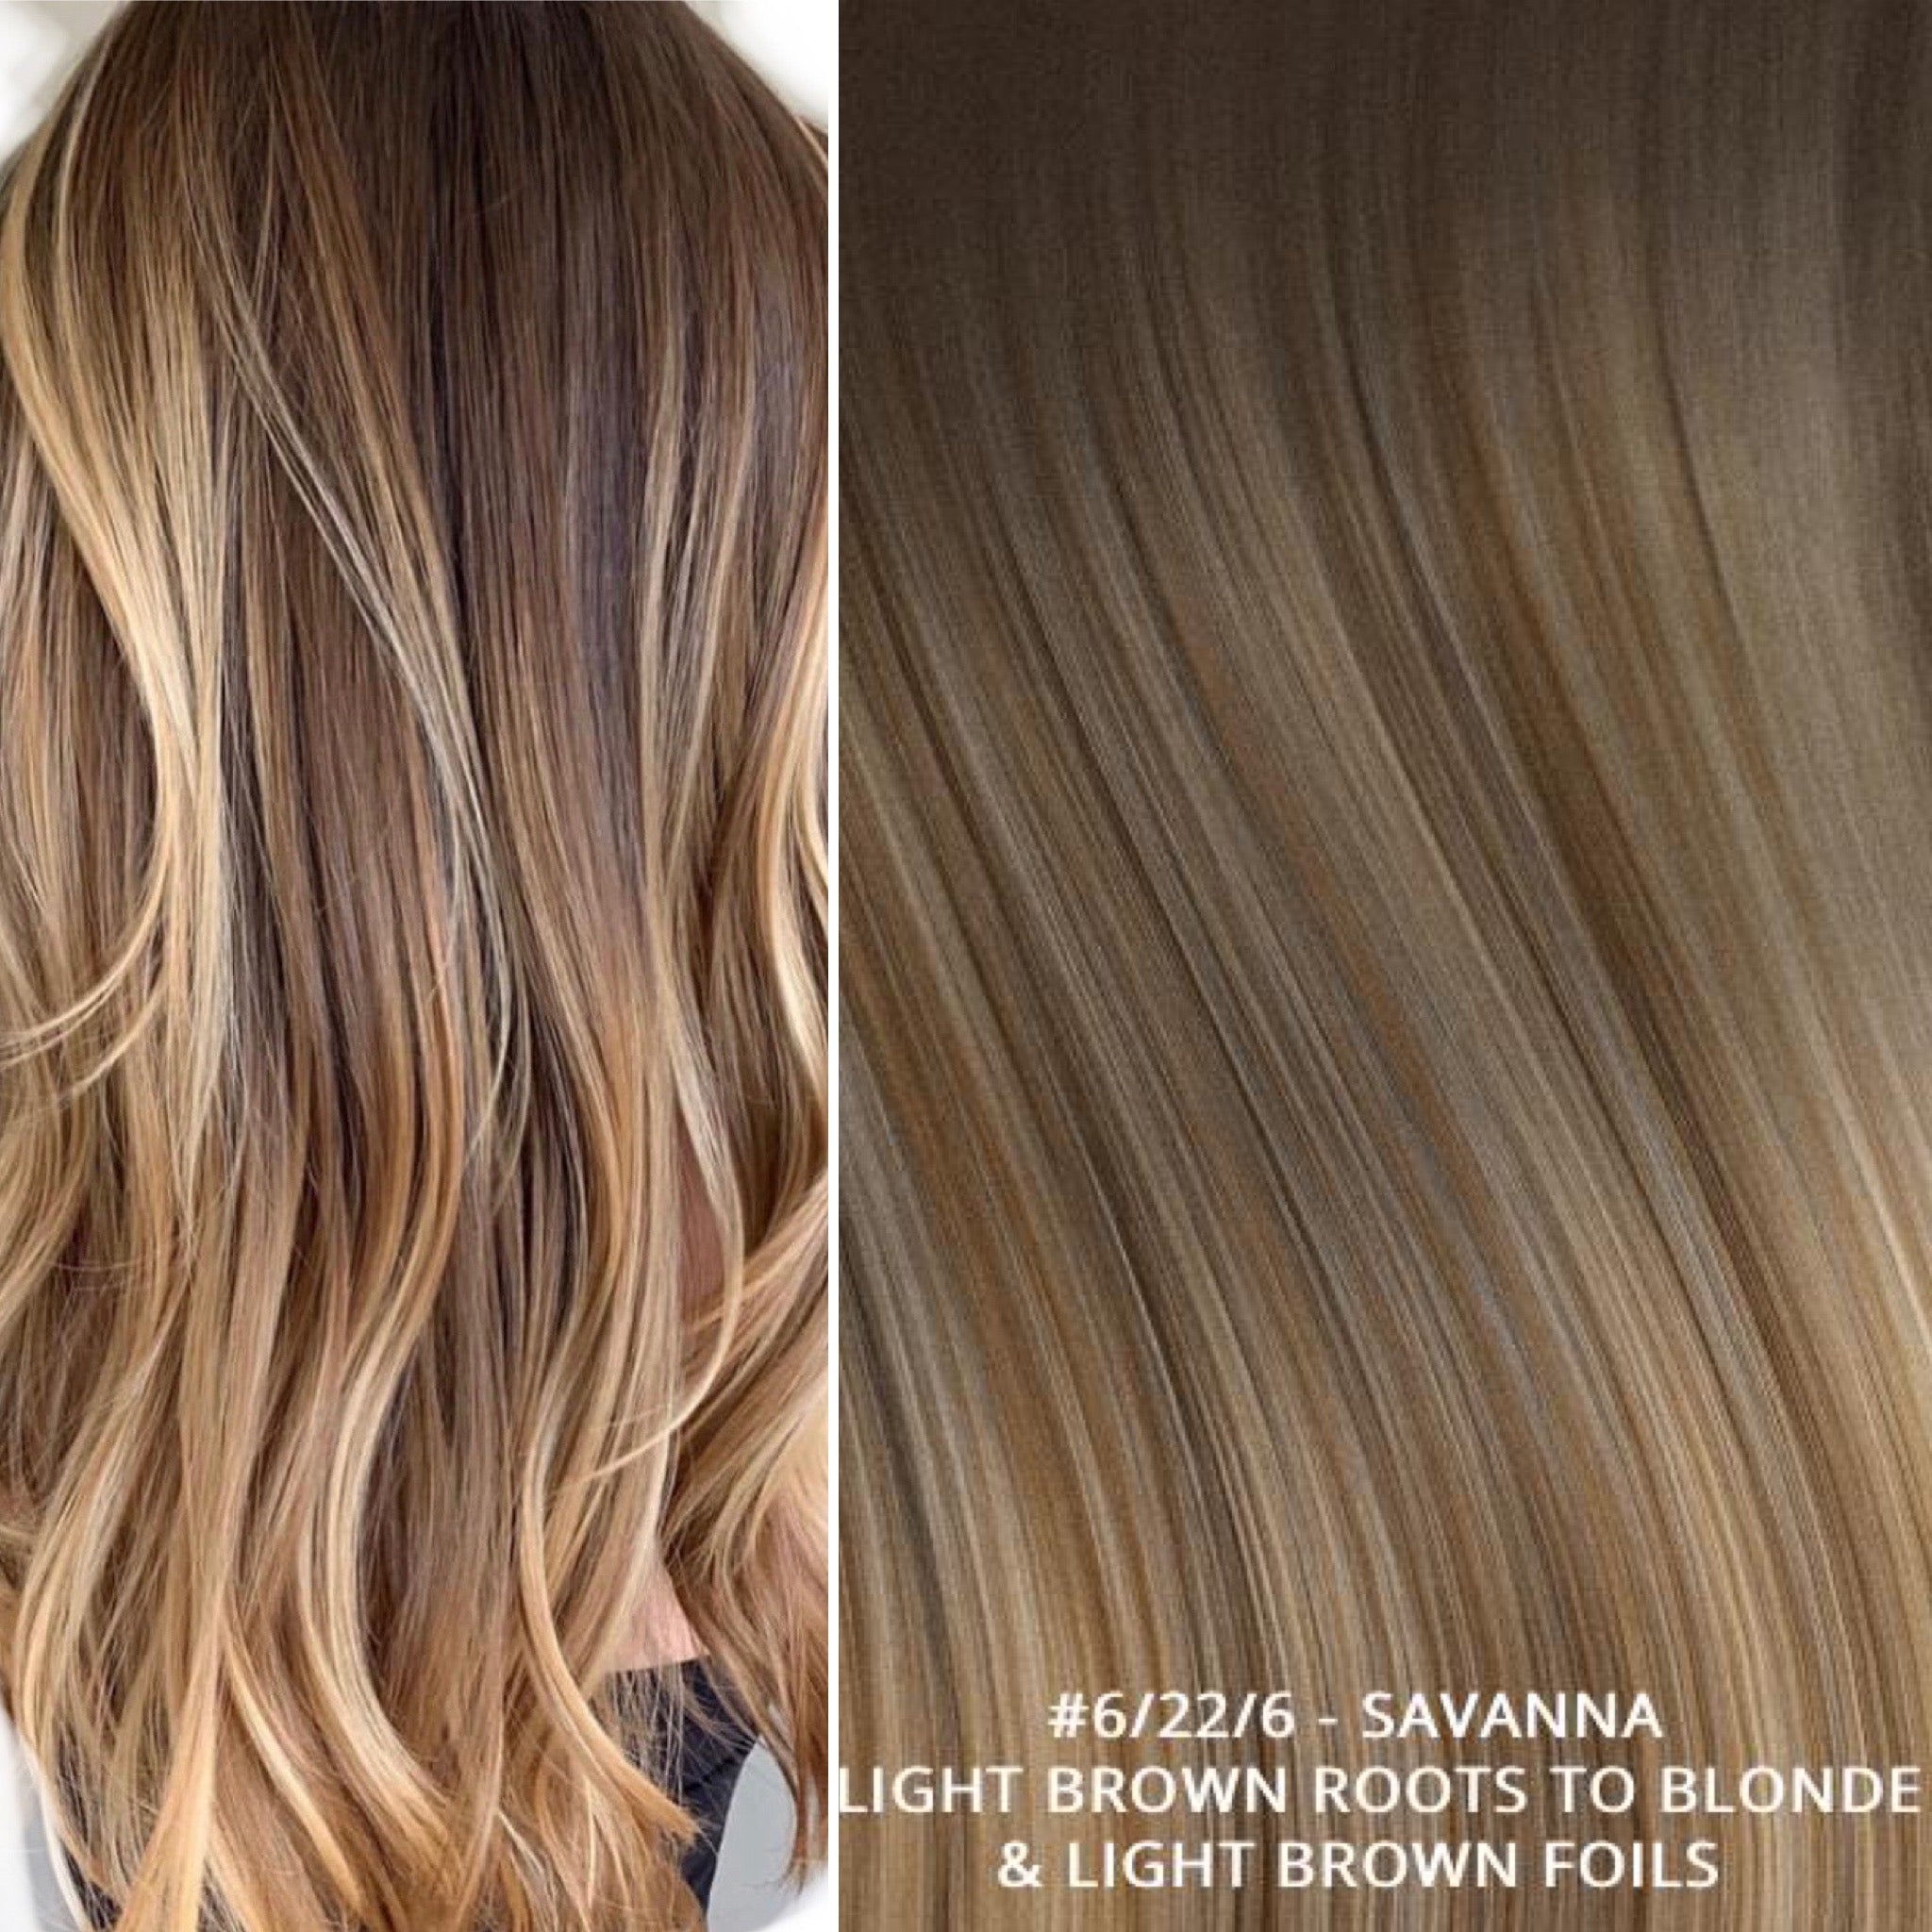 Russian tape short root balayage ombre hair extensions #6/22/6 - SAVANNA - LIGHT BROWN ROOTS TO BLONDE & LIGHT BROWN FOILS